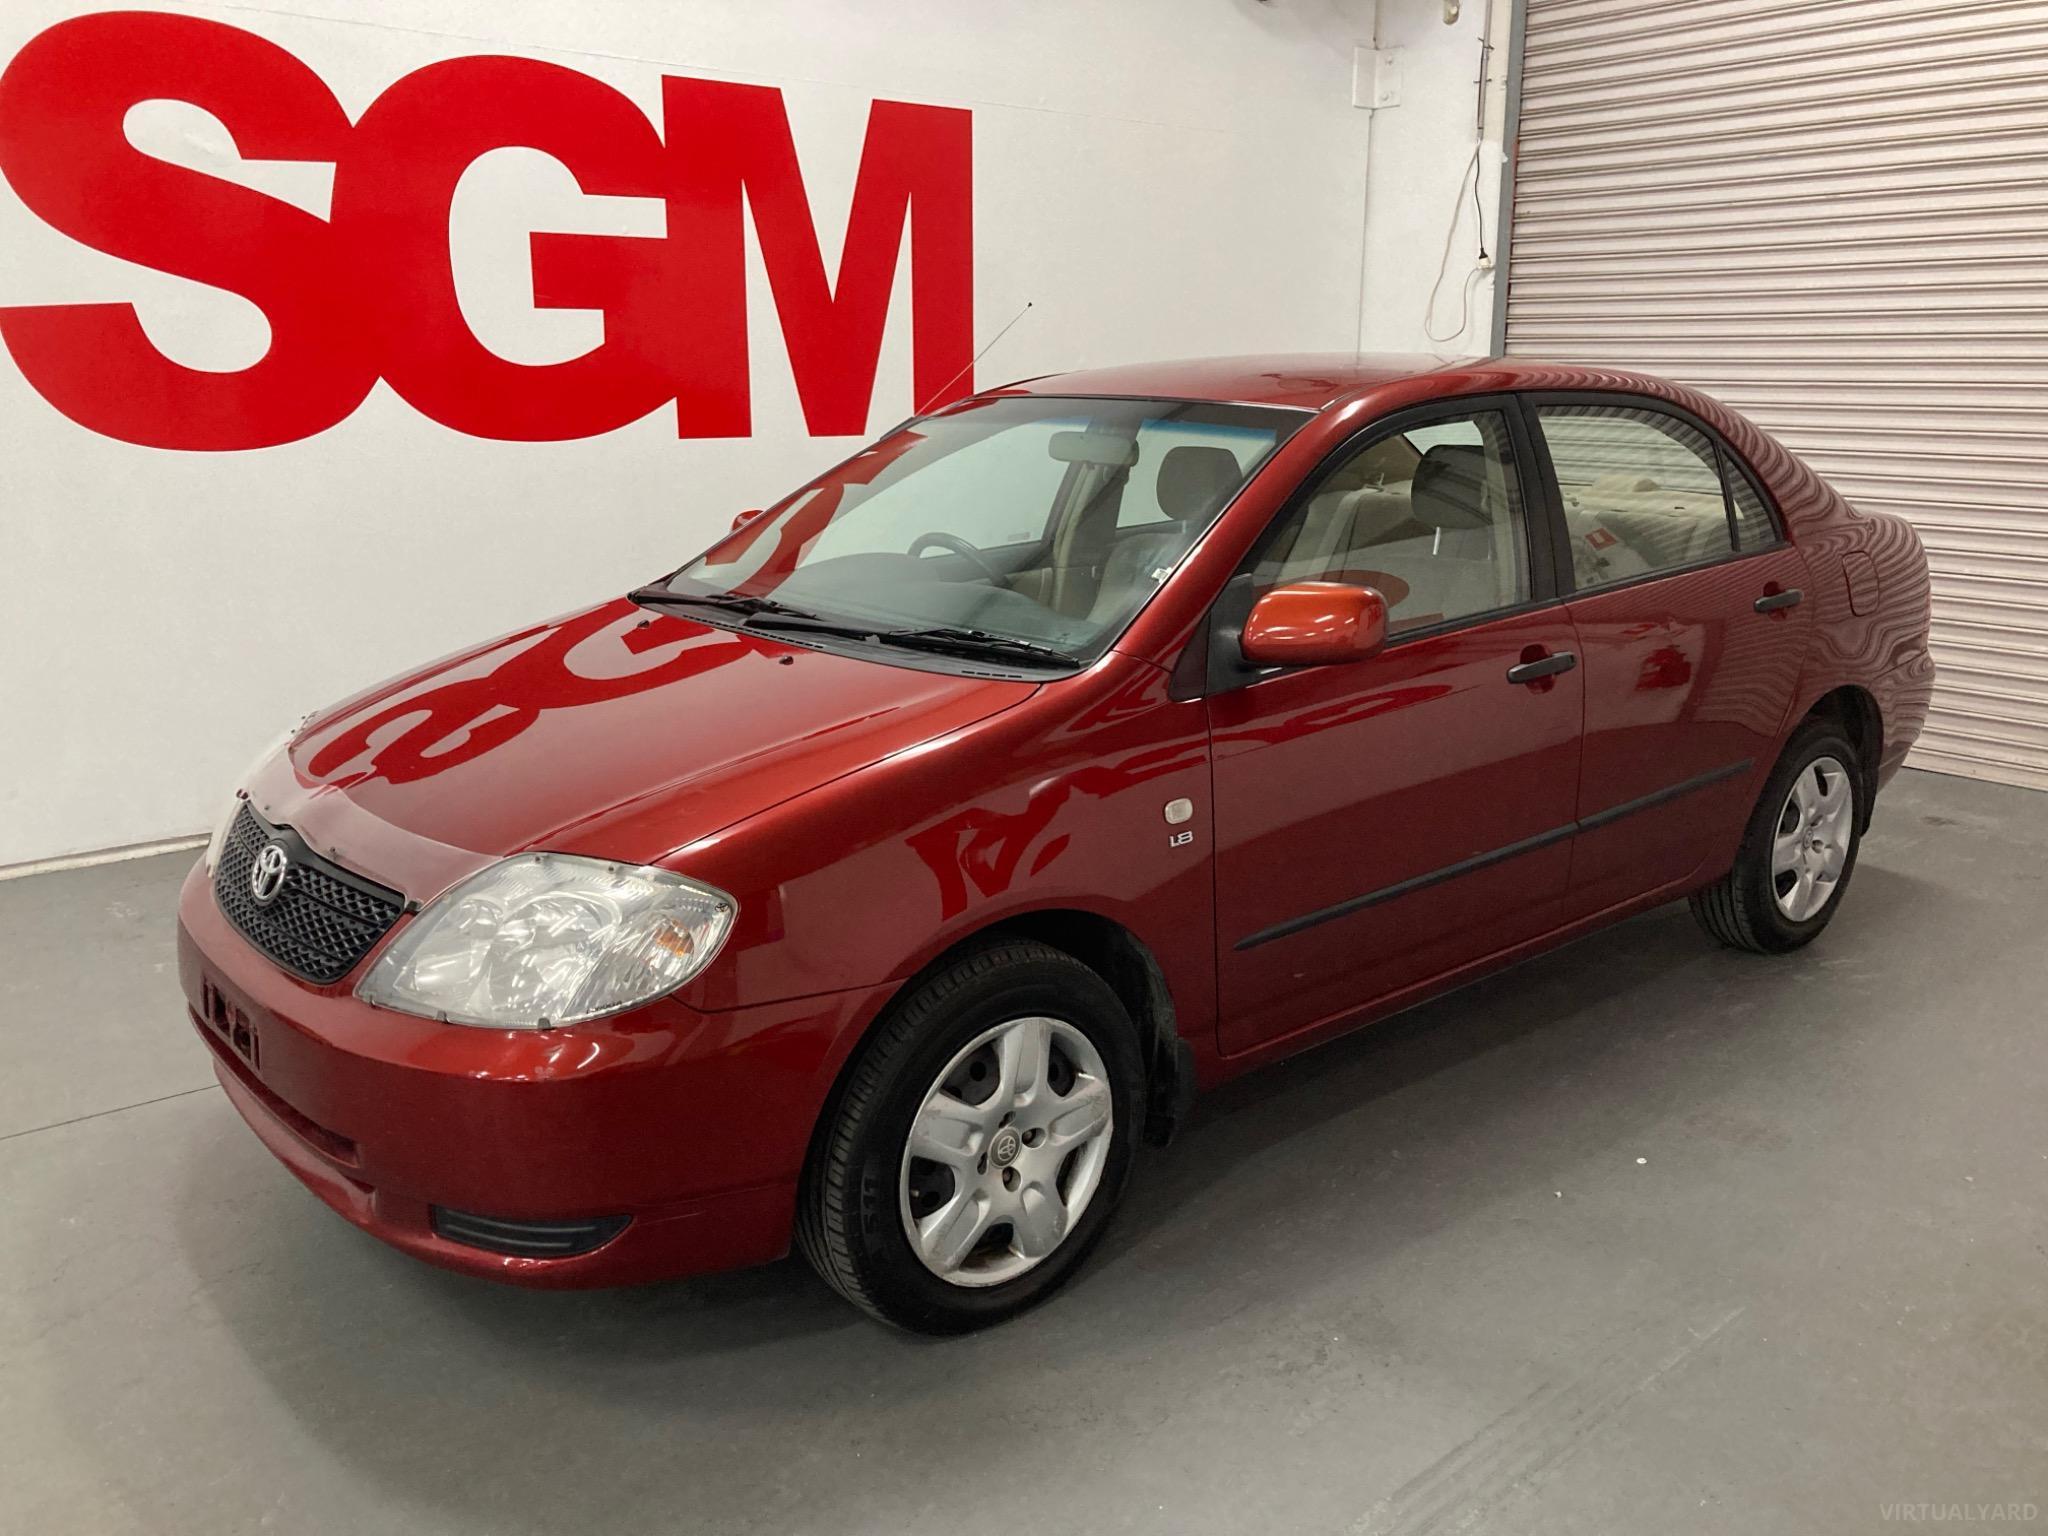 2003 Toyota Corolla ZZE122R 5Y Ascent Sedan 4dr Auto 4sp 1.8i (May) Picture 8